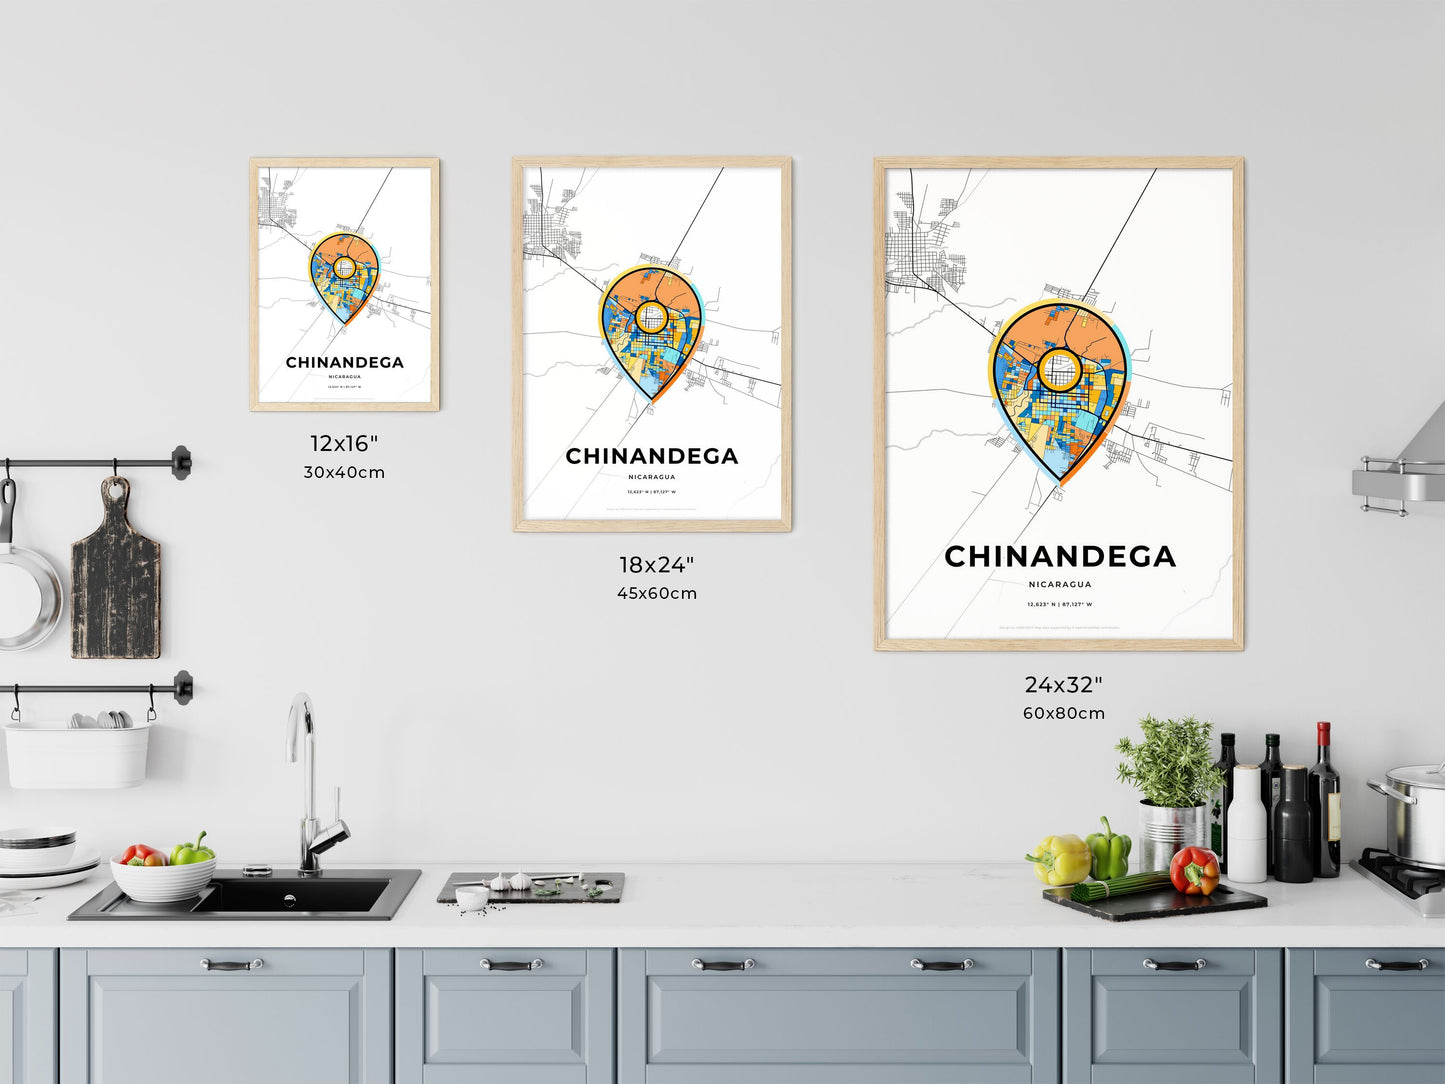 CHINANDEGA NICARAGUA minimal art map with a colorful icon. Where it all began, Couple map gift.